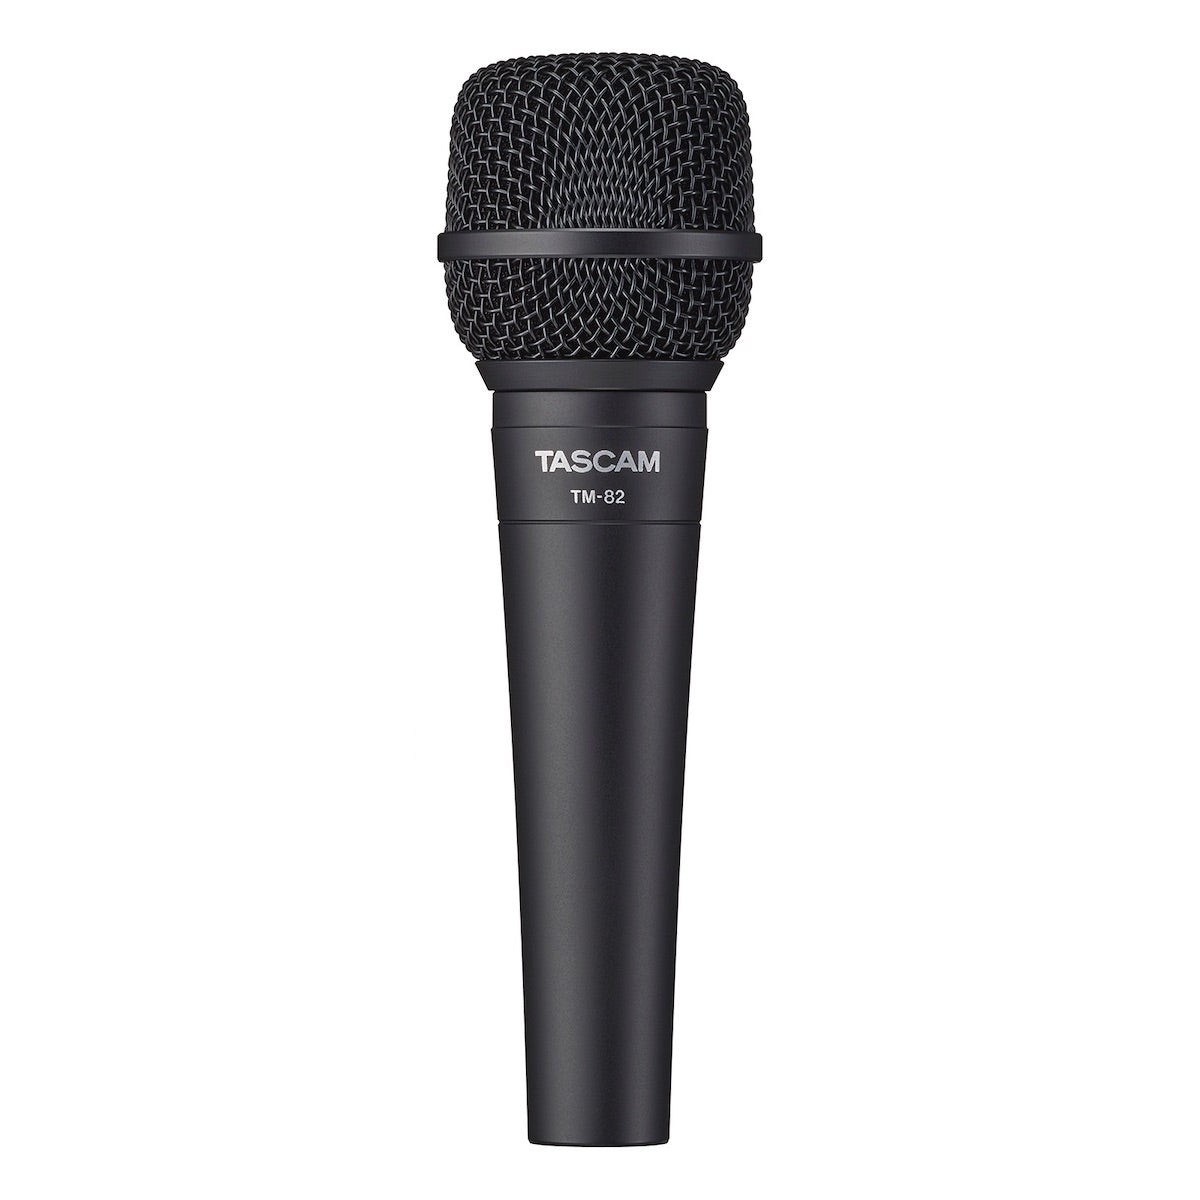 Tascam TM-82 - Dynamic Microphone for Vocals and Instruments